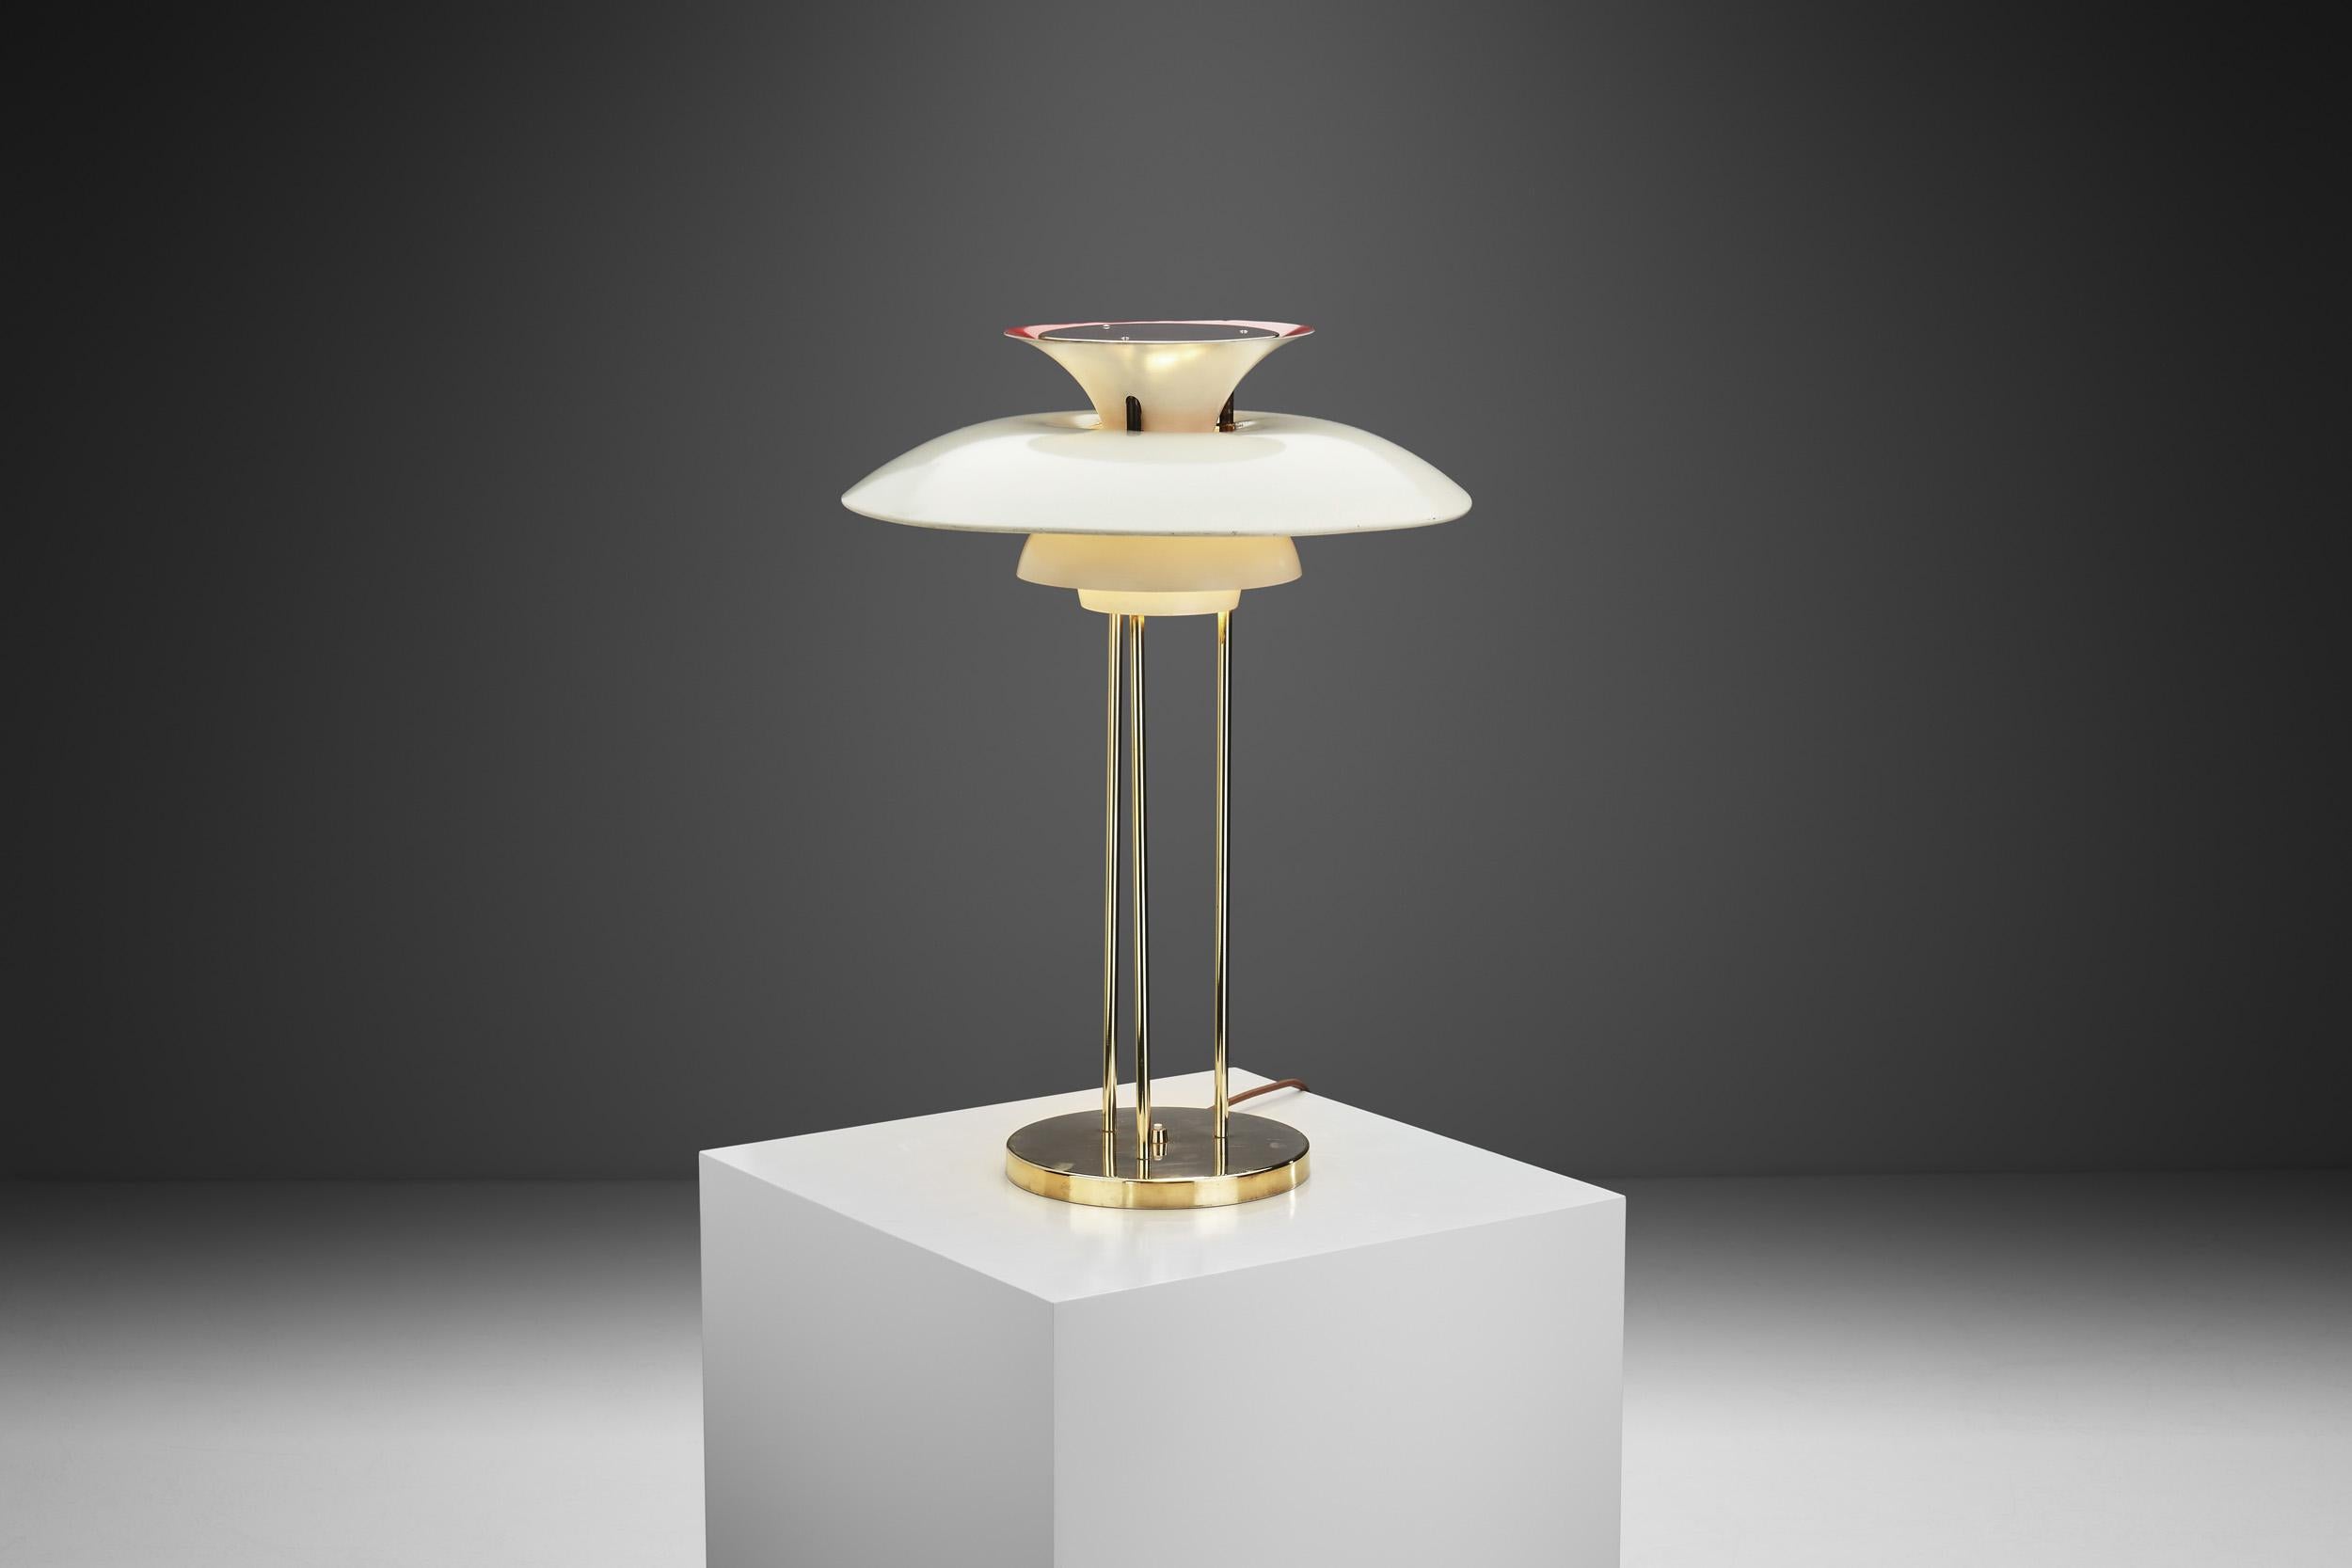 This “PH-5” table lamp from the Danish “Master of Soft Light”, Poul Henningsen, is one of the designer’s most popular models, and is considered to be an icon of Scandinavian modern lighting design.

Perhaps the most recognizable of all the Poul